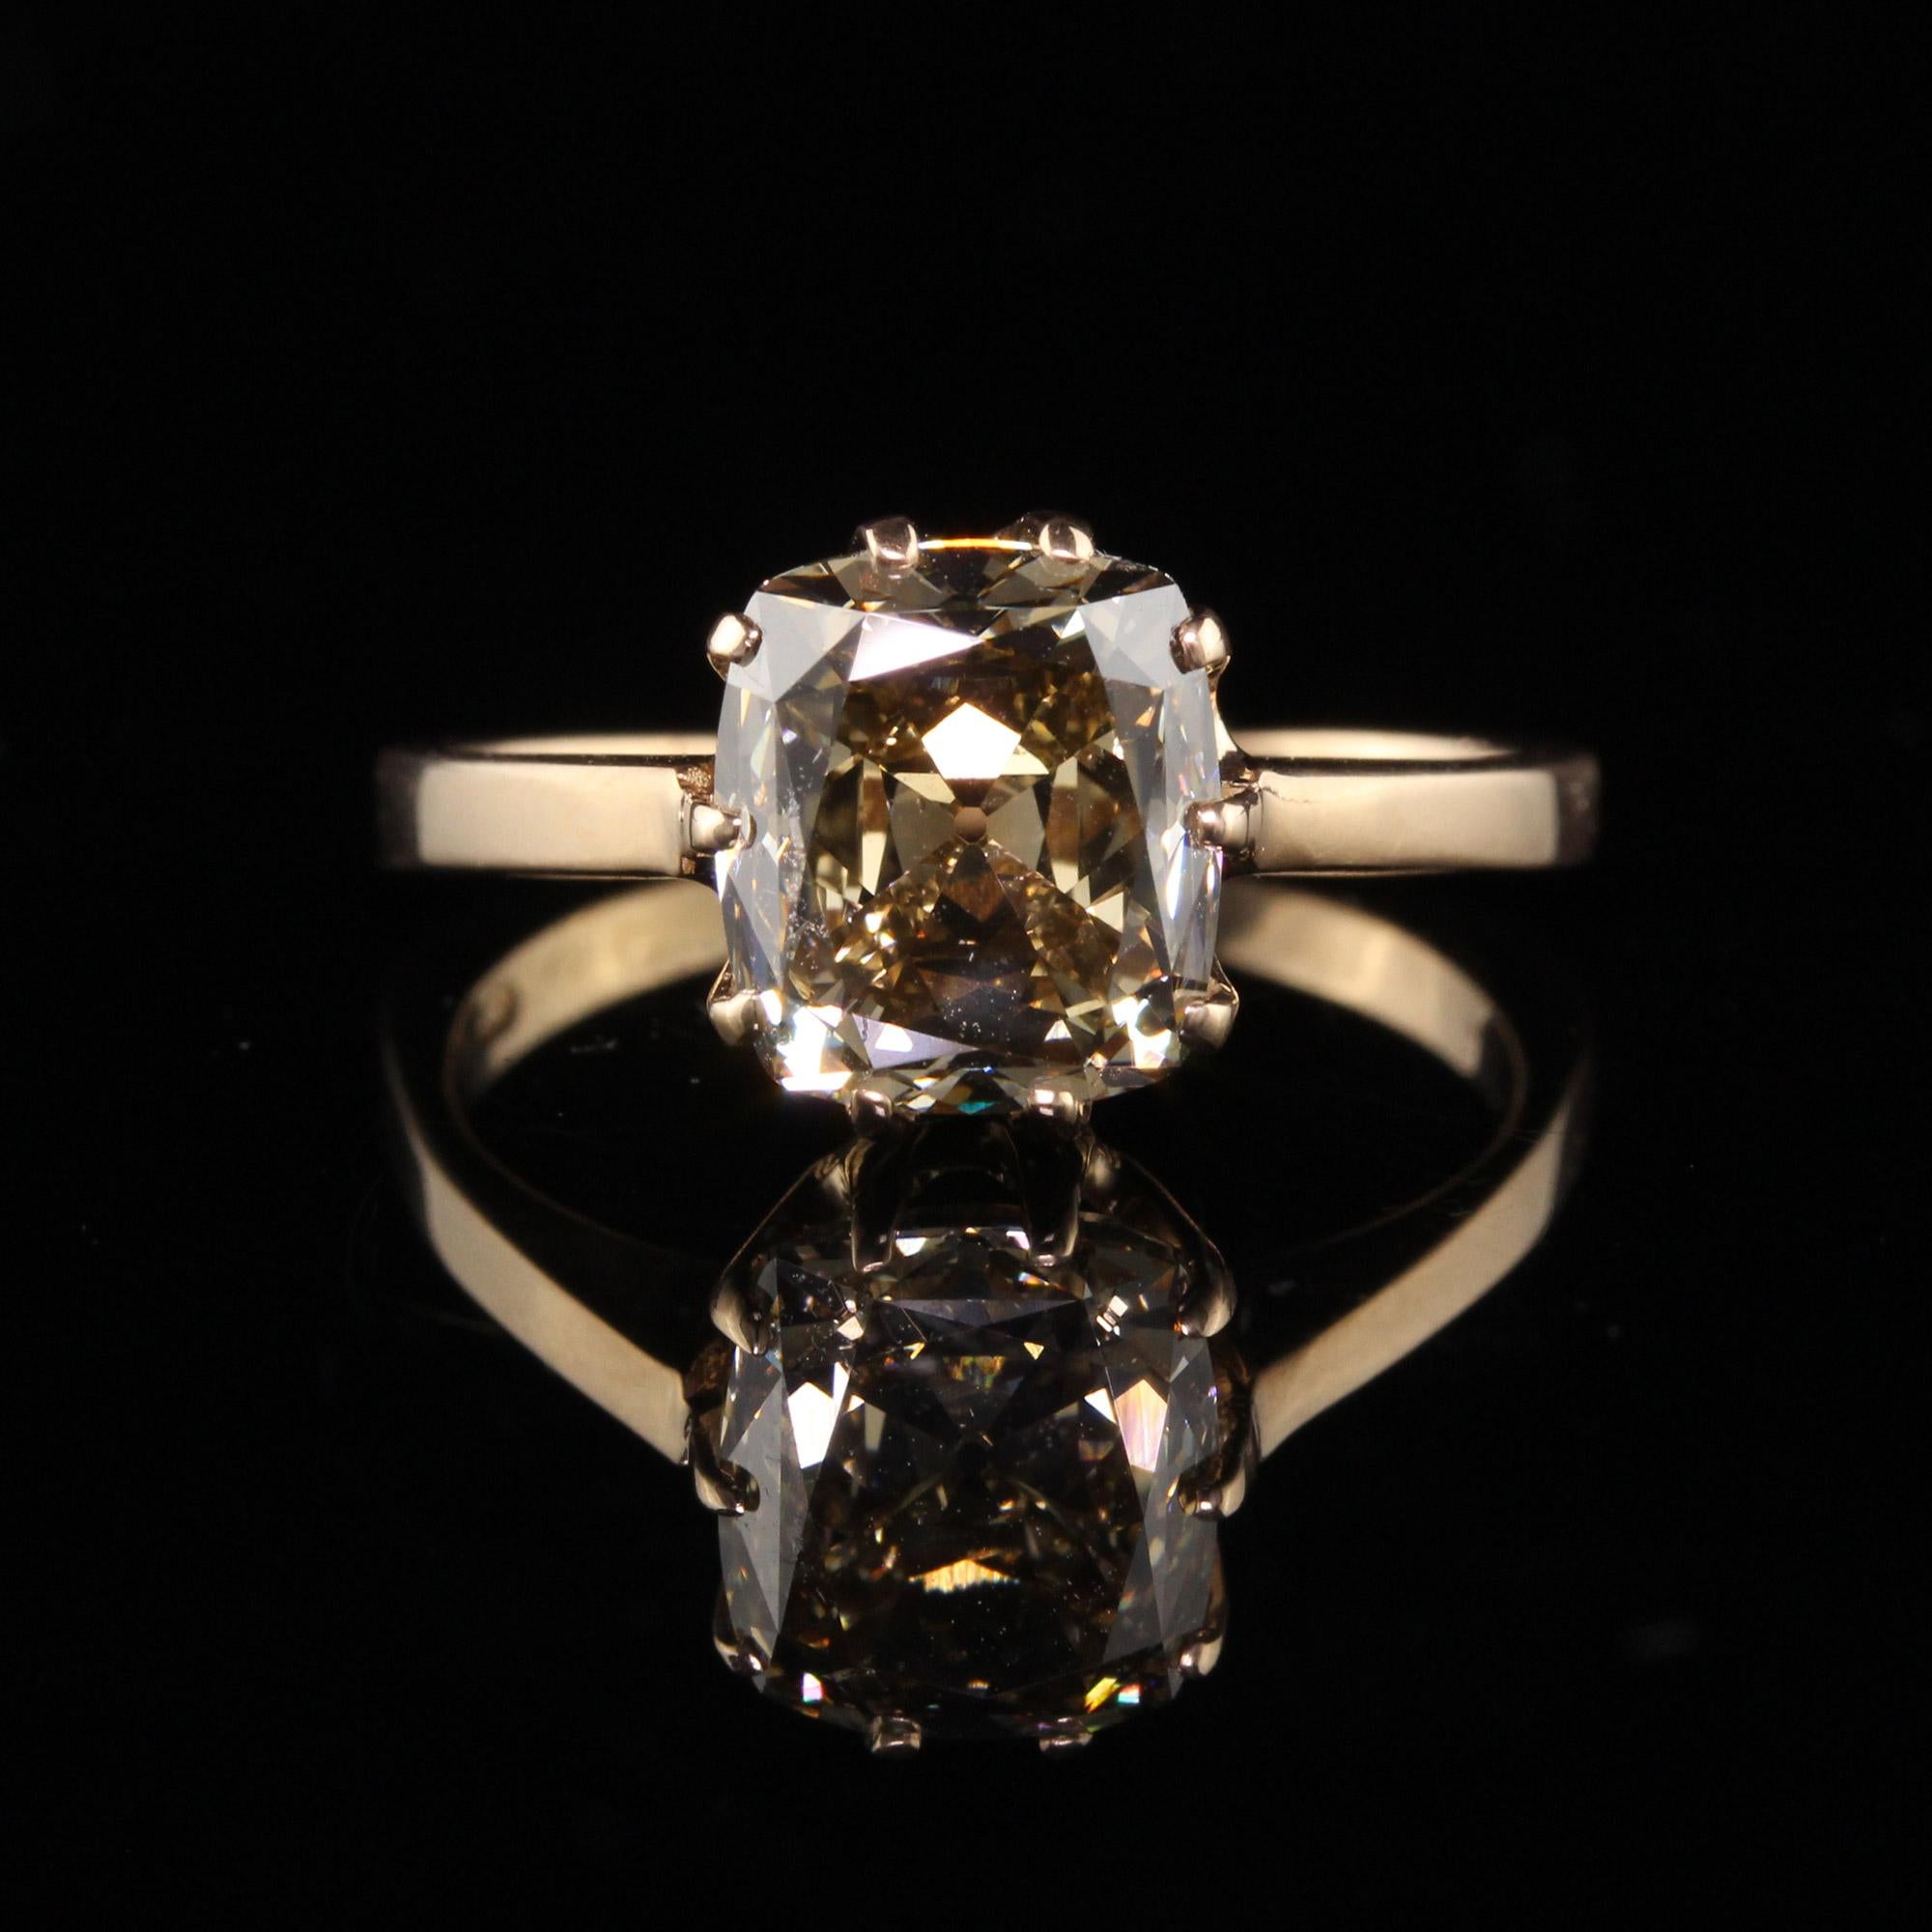 Beautiful Antique Art Deco 18K Yellow Gold Fancy Yellow Old Mine Diamond Engagement Ring. This gorgeous engagement ring is crafted in 18k yellow gold. The center holds a large fancy Yellow - Brown old mine cut diamond in the center of a classic